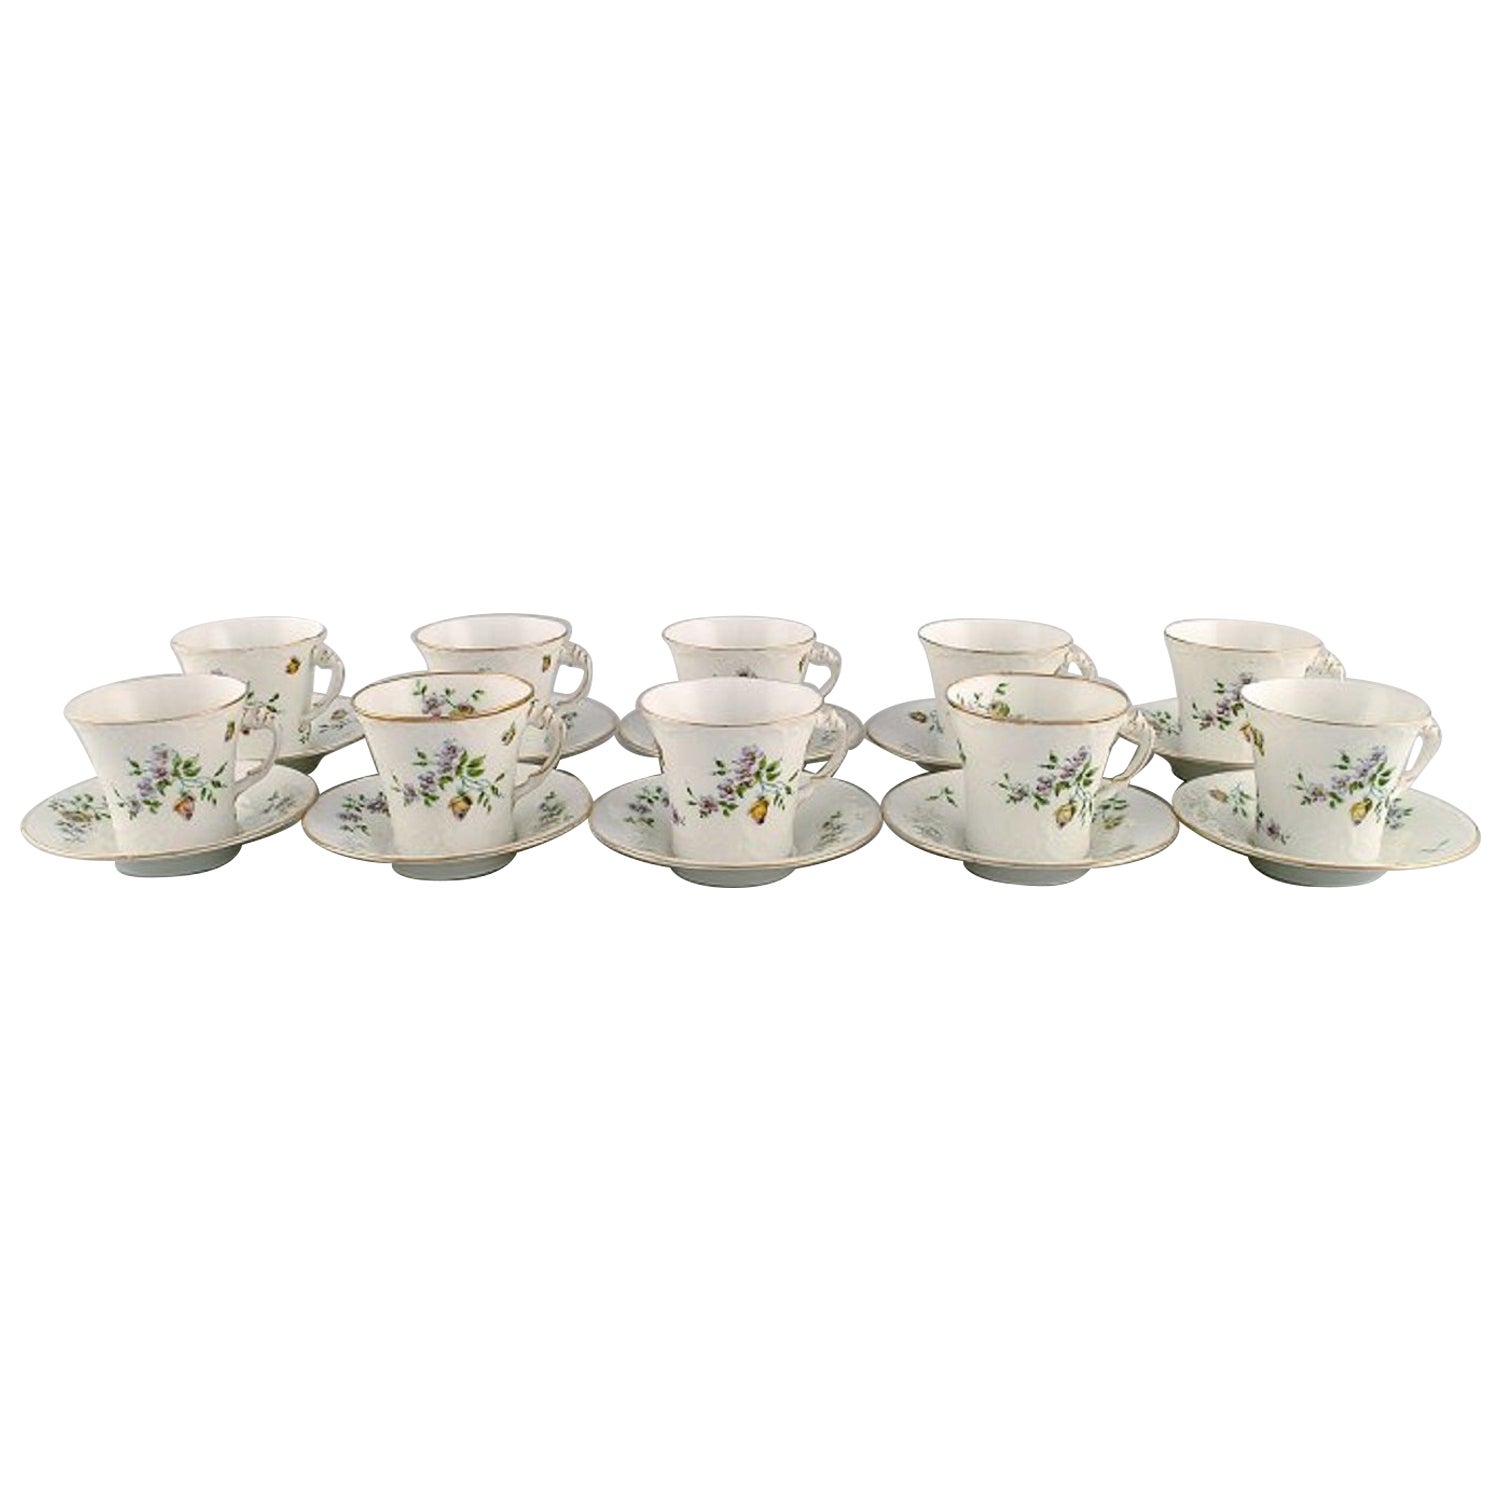 10 Rörstrand coffee cups with saucers in hand-painted porcelain. For Sale